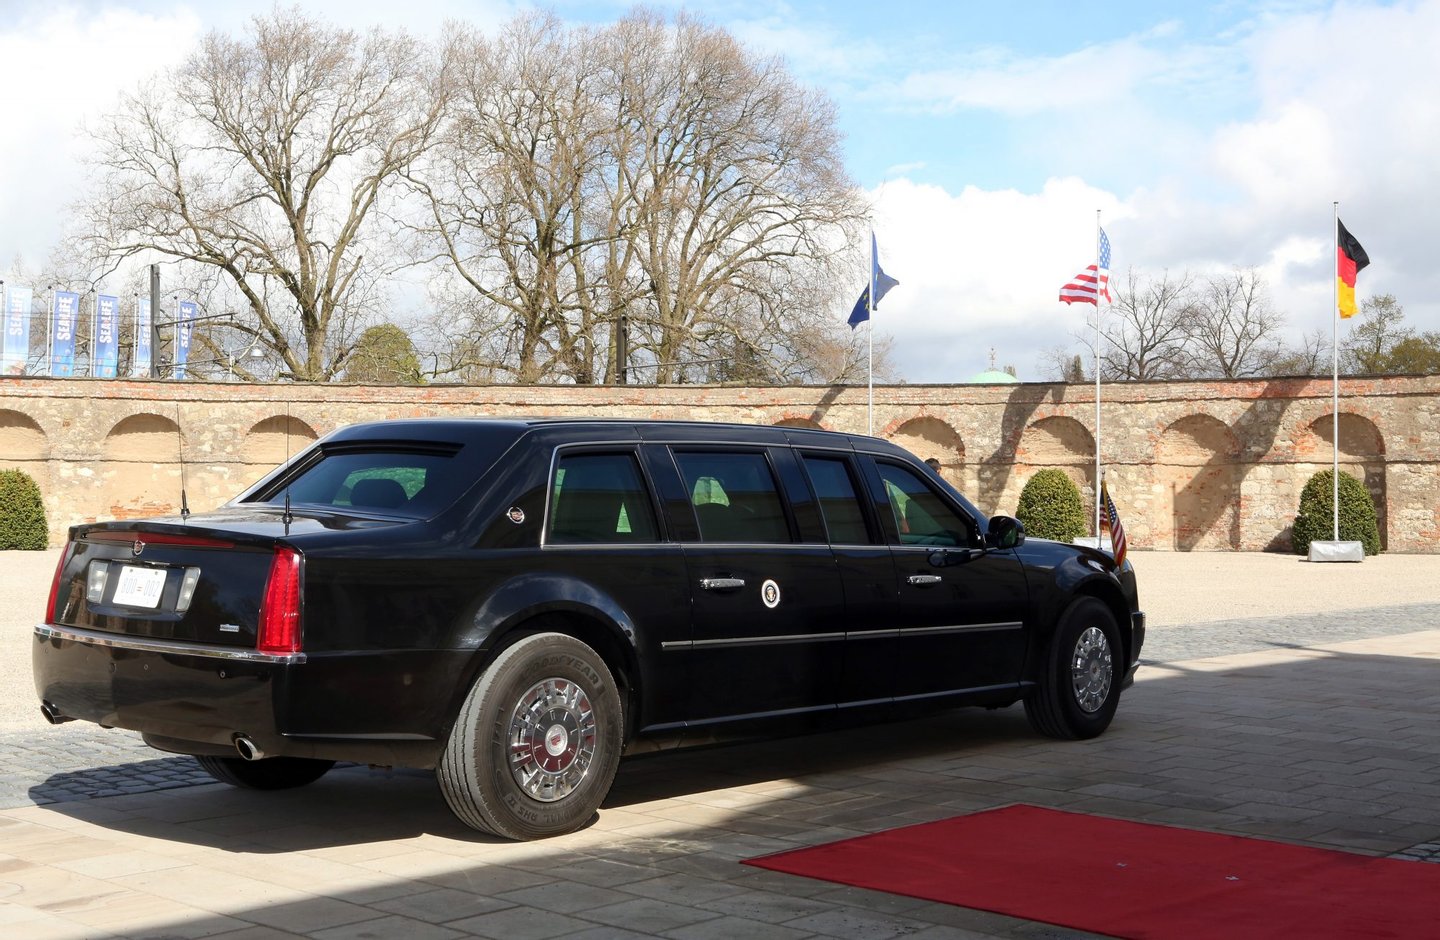 HANOVER, GERMANY - APRIL 24: 'The Beast,' the car used by U.S. President Barack Obama, is seen as he meets with German Chancellor Angela Merkel (CDU) on April 24, 2016 in Hanover, Germany. Obama is in the city to visit the Hanover Messe, the world's biggest industrial fair, featuring around 6,500 exhibitors. The trip is likely to be his last to the country as president. (Photo by Adam Berry/Getty Images)